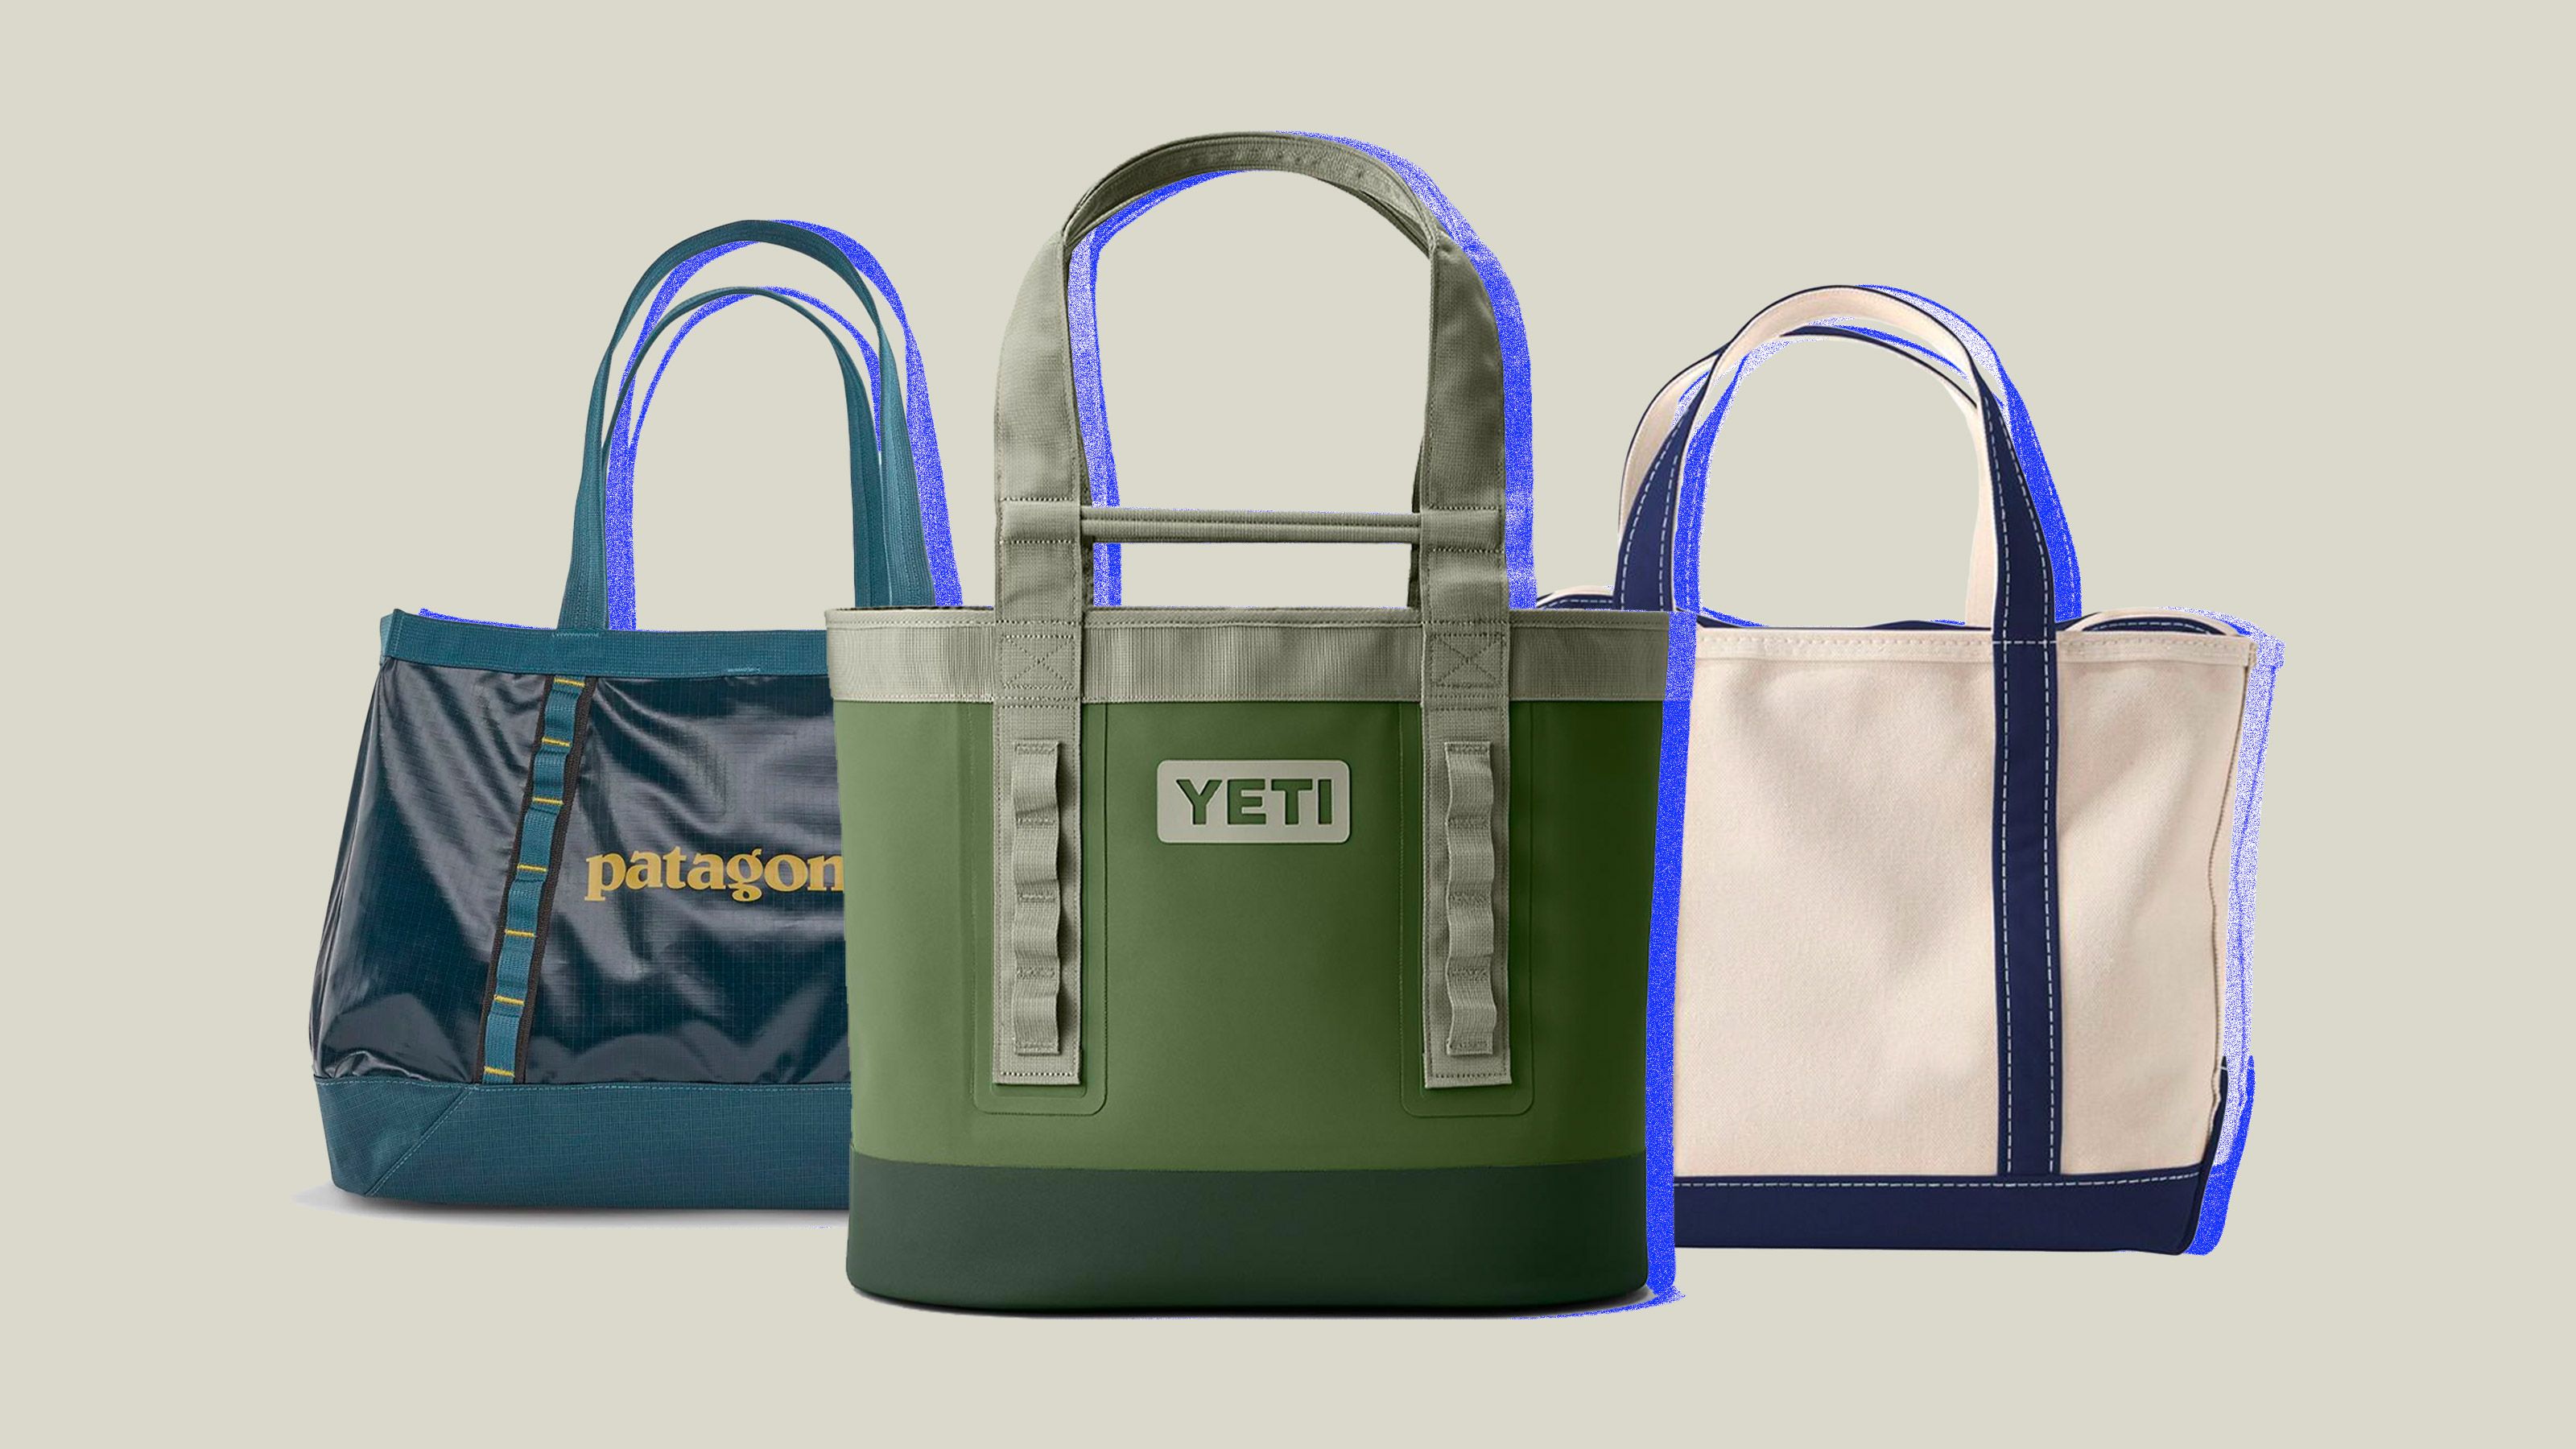 YETC35 Camino 35 Carry All Tote Bag custom embroidered or printed with your  logo.